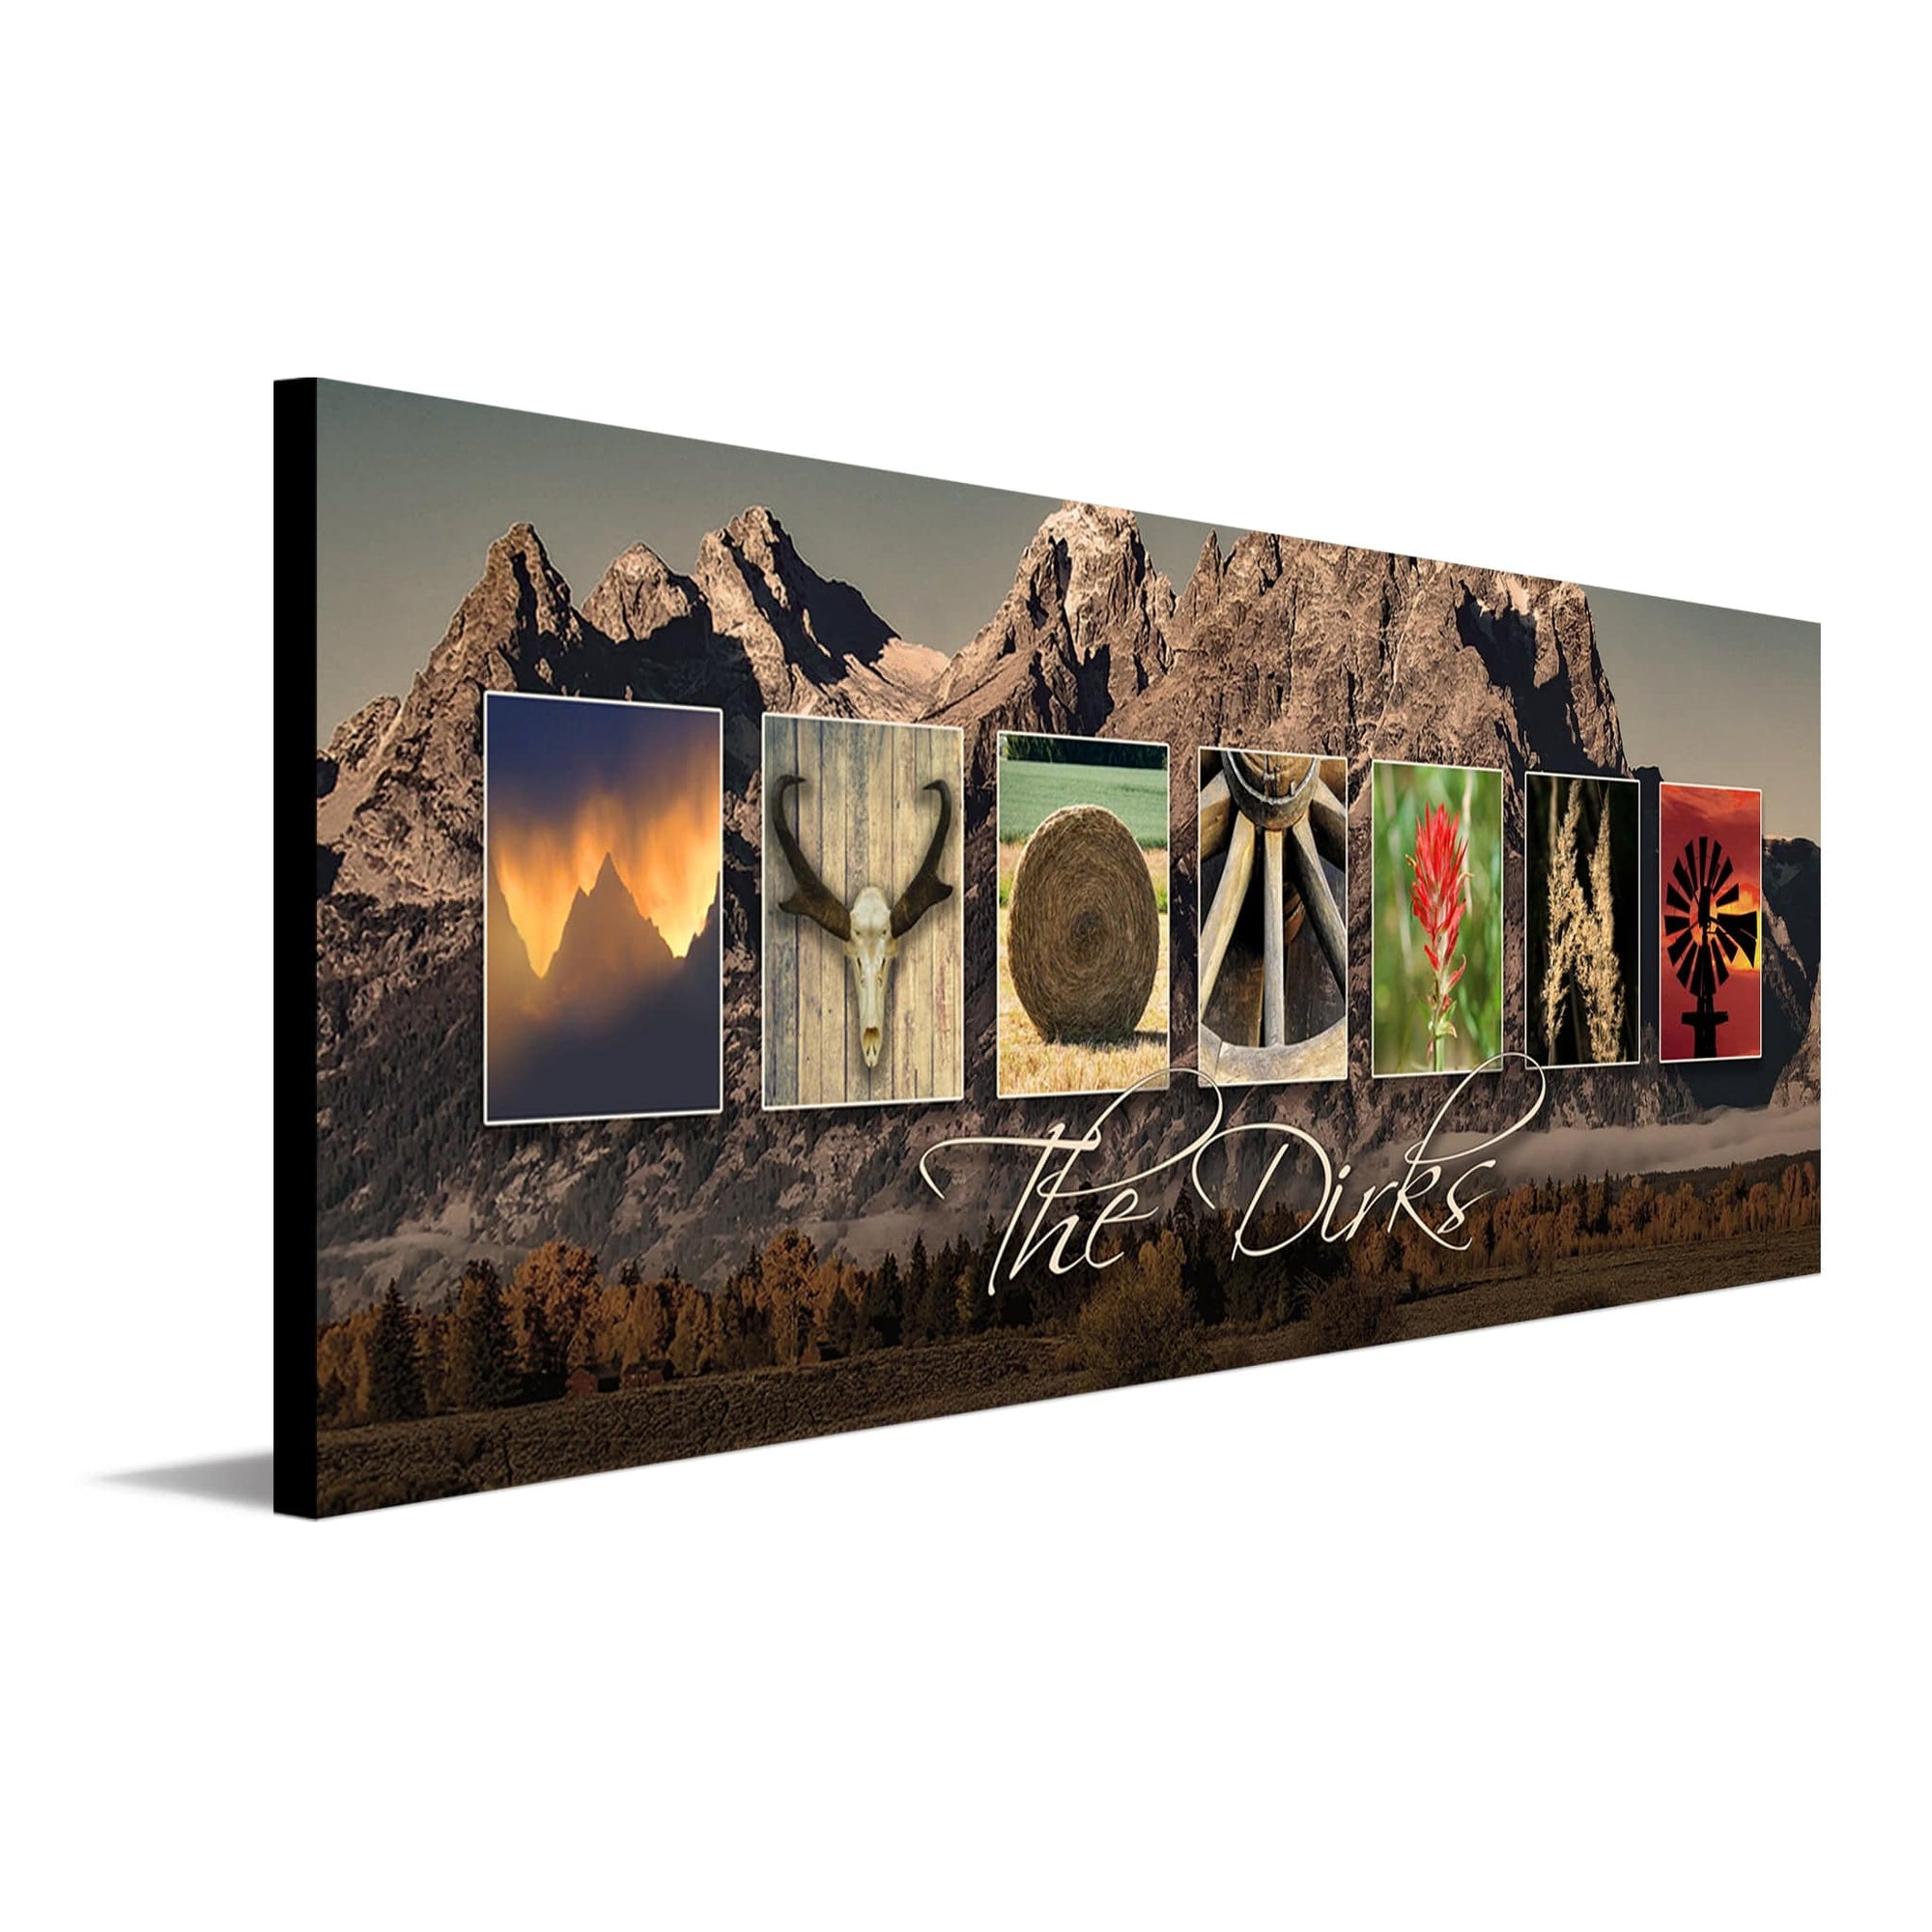 Personalized Wyoming art using images from the state to spell the word Wyoming - Personal-Prints